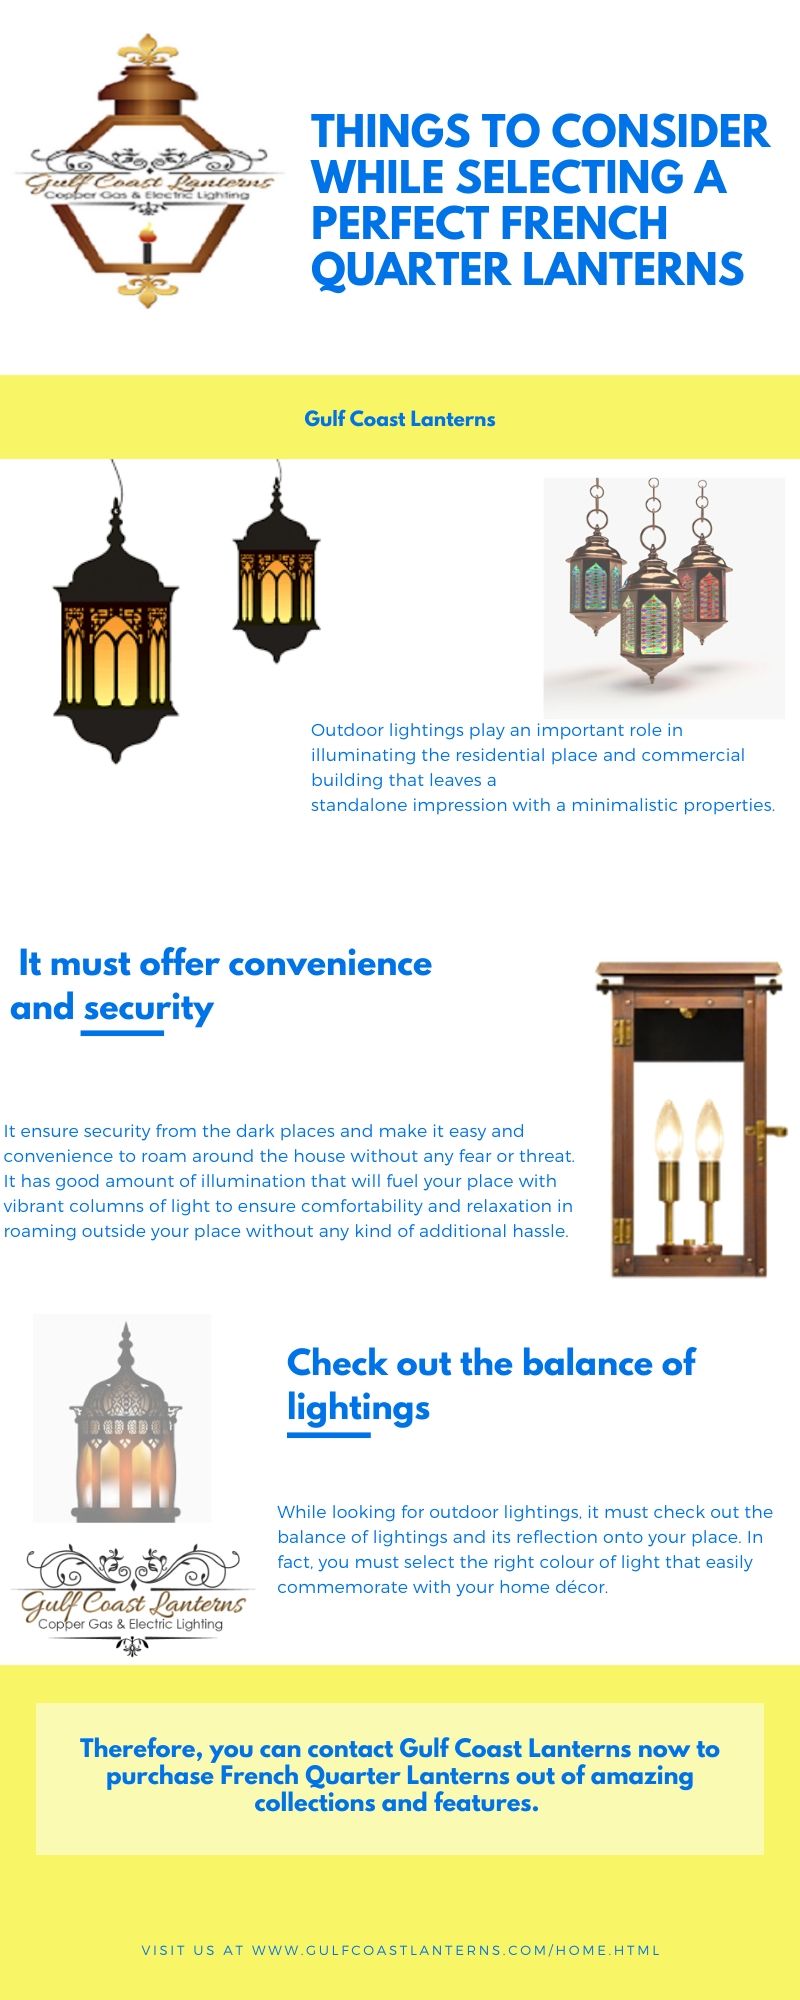 Things to consider while selecting a perfect French Quarter Lanterns.jpg  by Gulfcoastlanterns